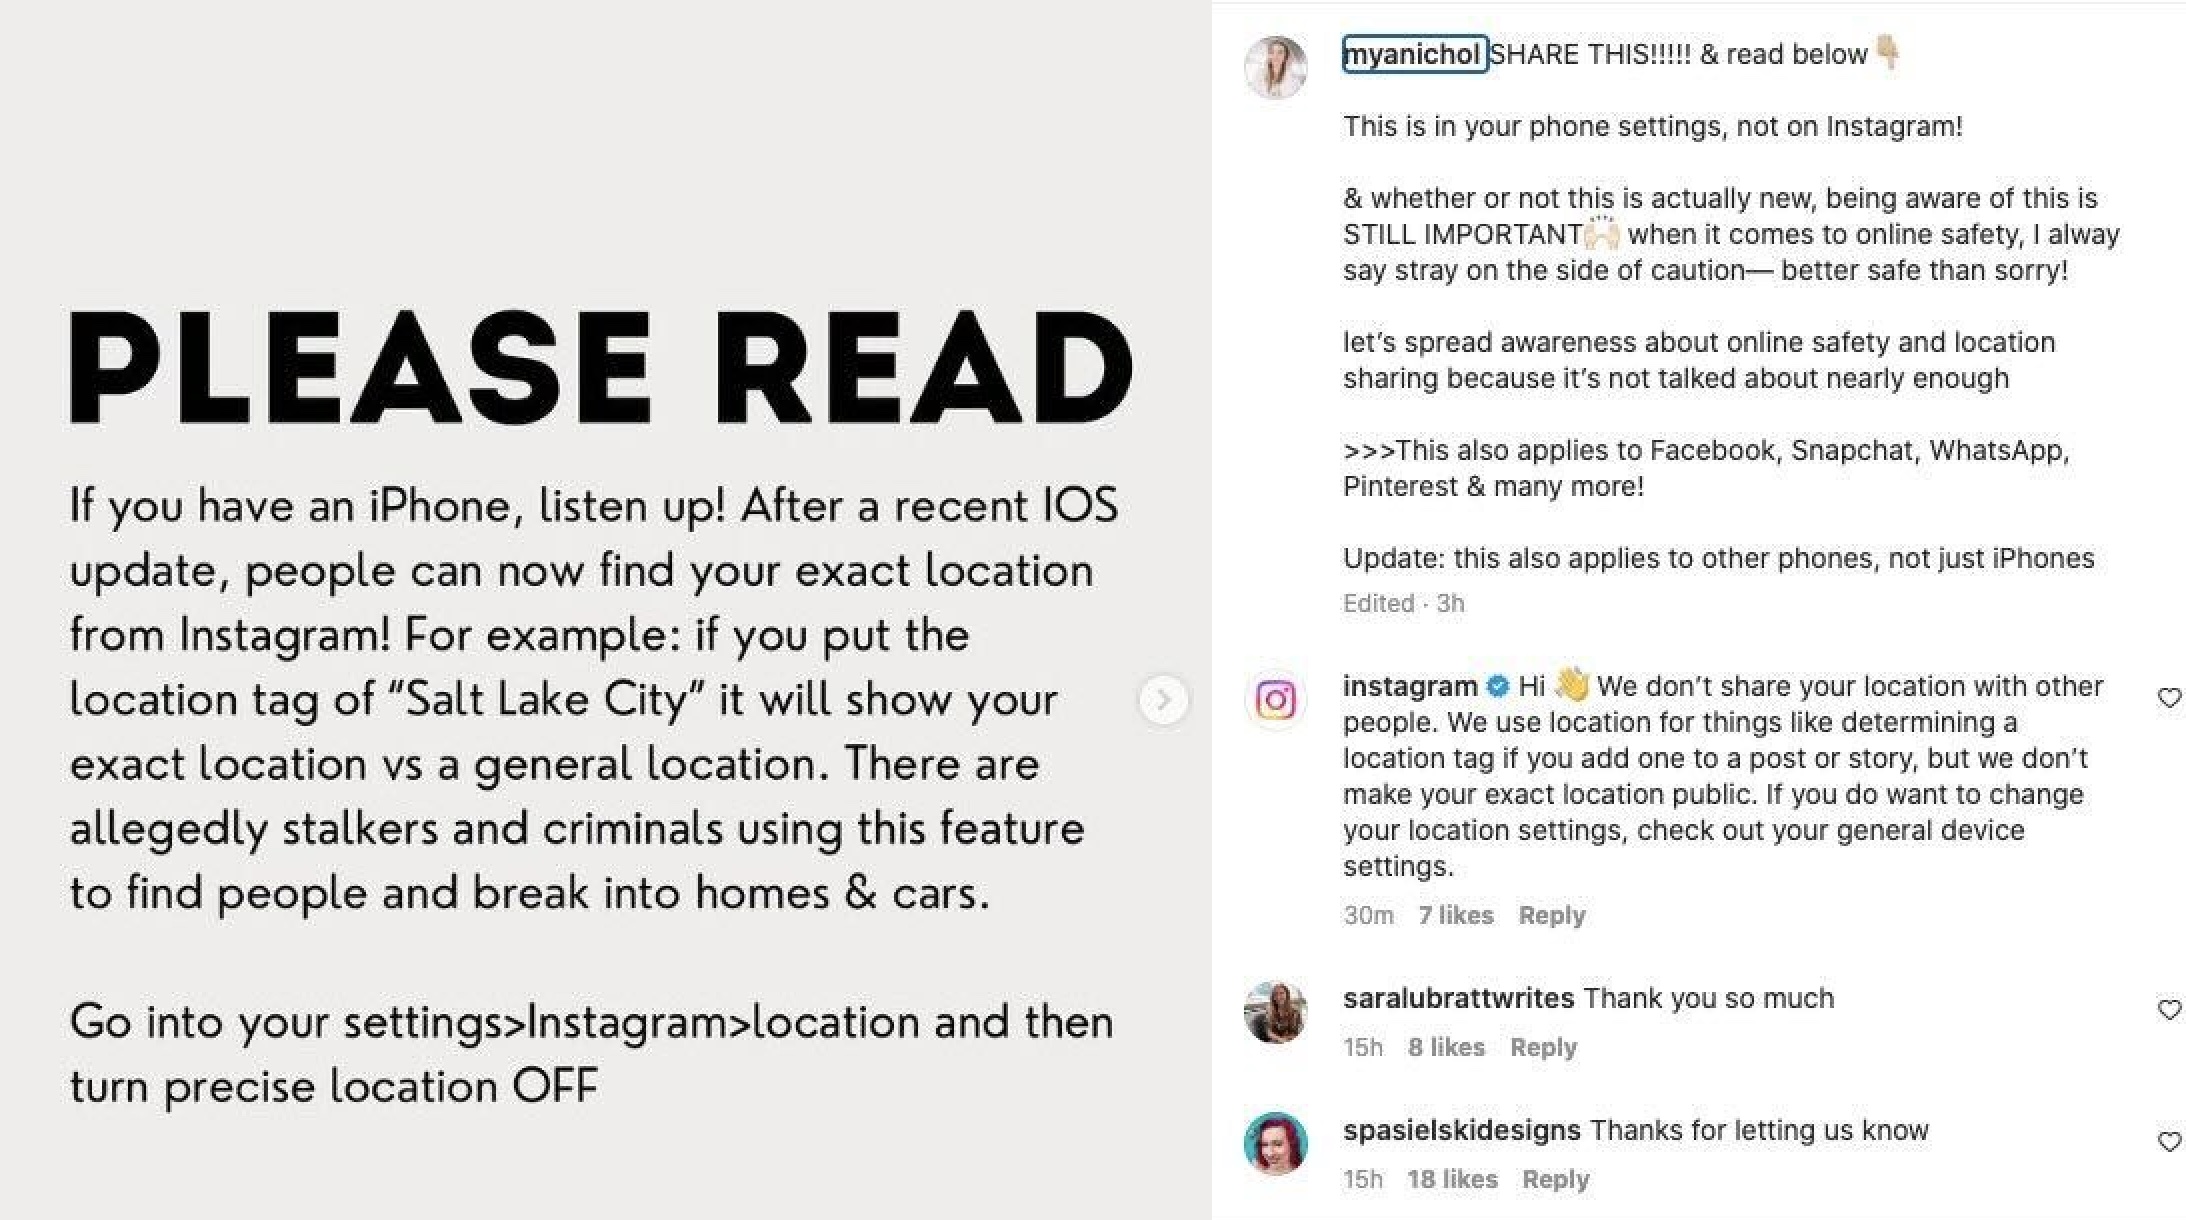 Instagram refutes viral post claiming it shares your precise location with followers